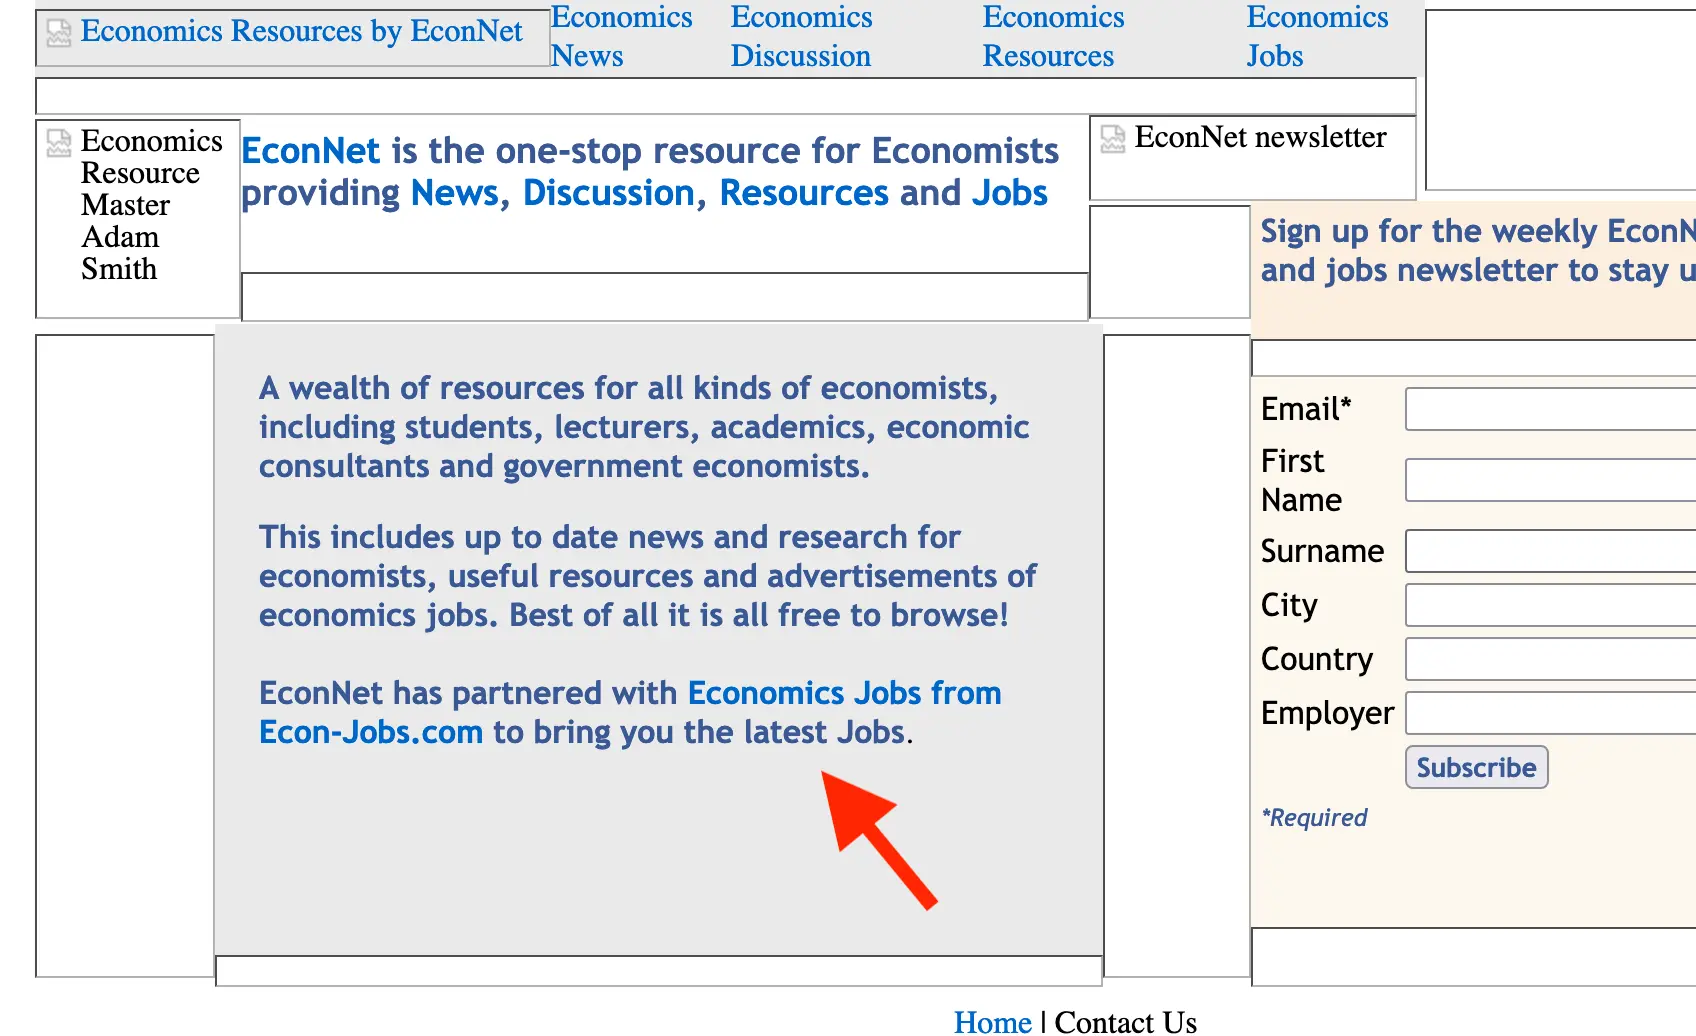 EconNet advertised its link with Econ-jobs.com